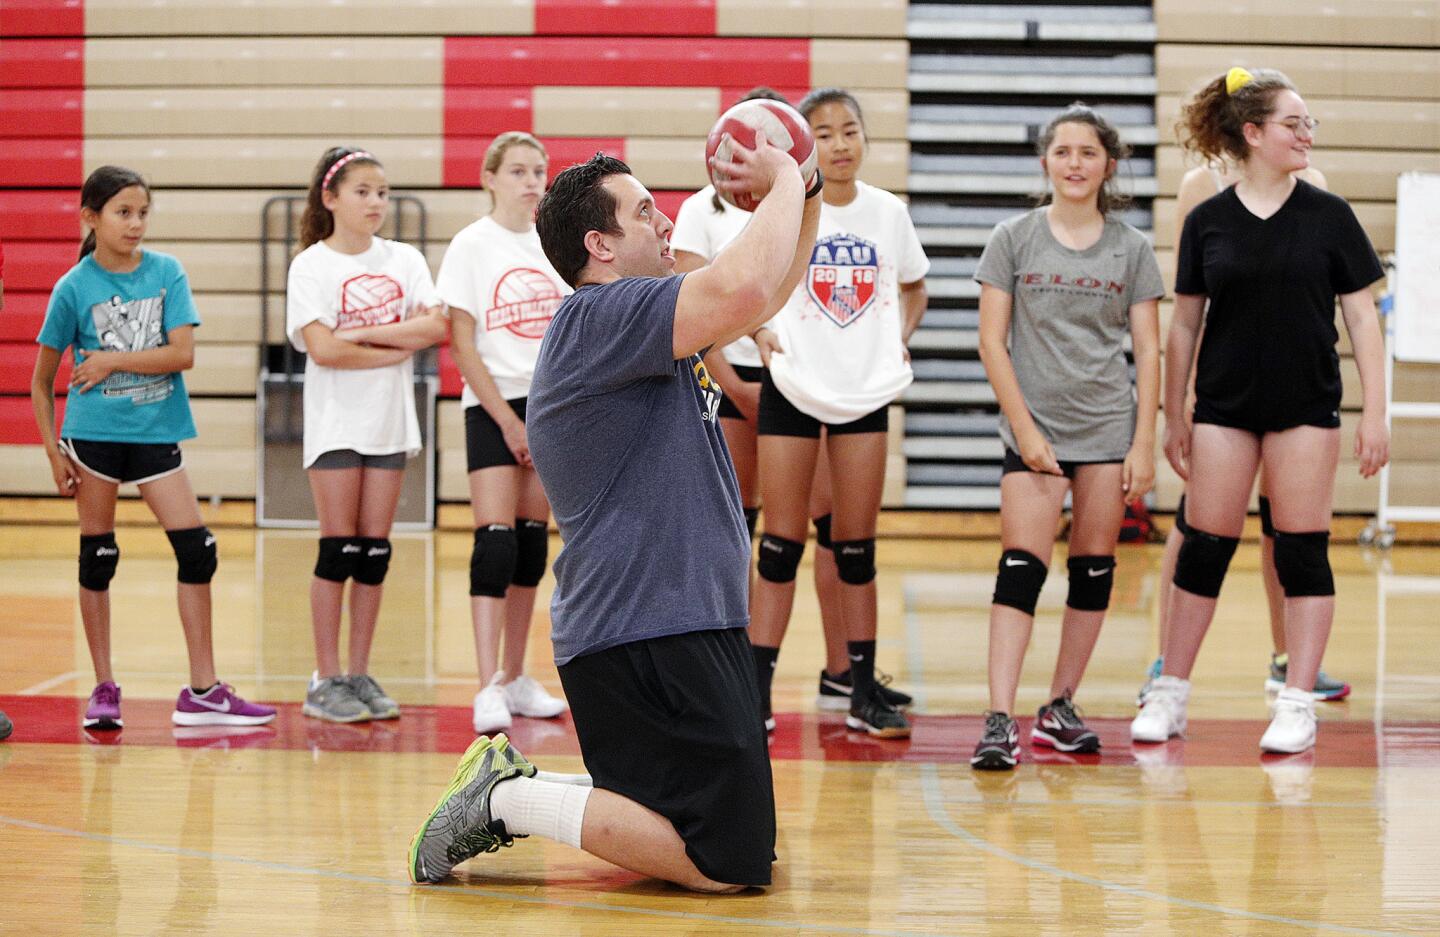 Burroughs volleyball coach Joel Brinton kneels and sets the ball to demonstrate a drill for his volleyball campers at Real's Youth Volleyball Camps at Burroughs High School on Monday, June 4, 2018.